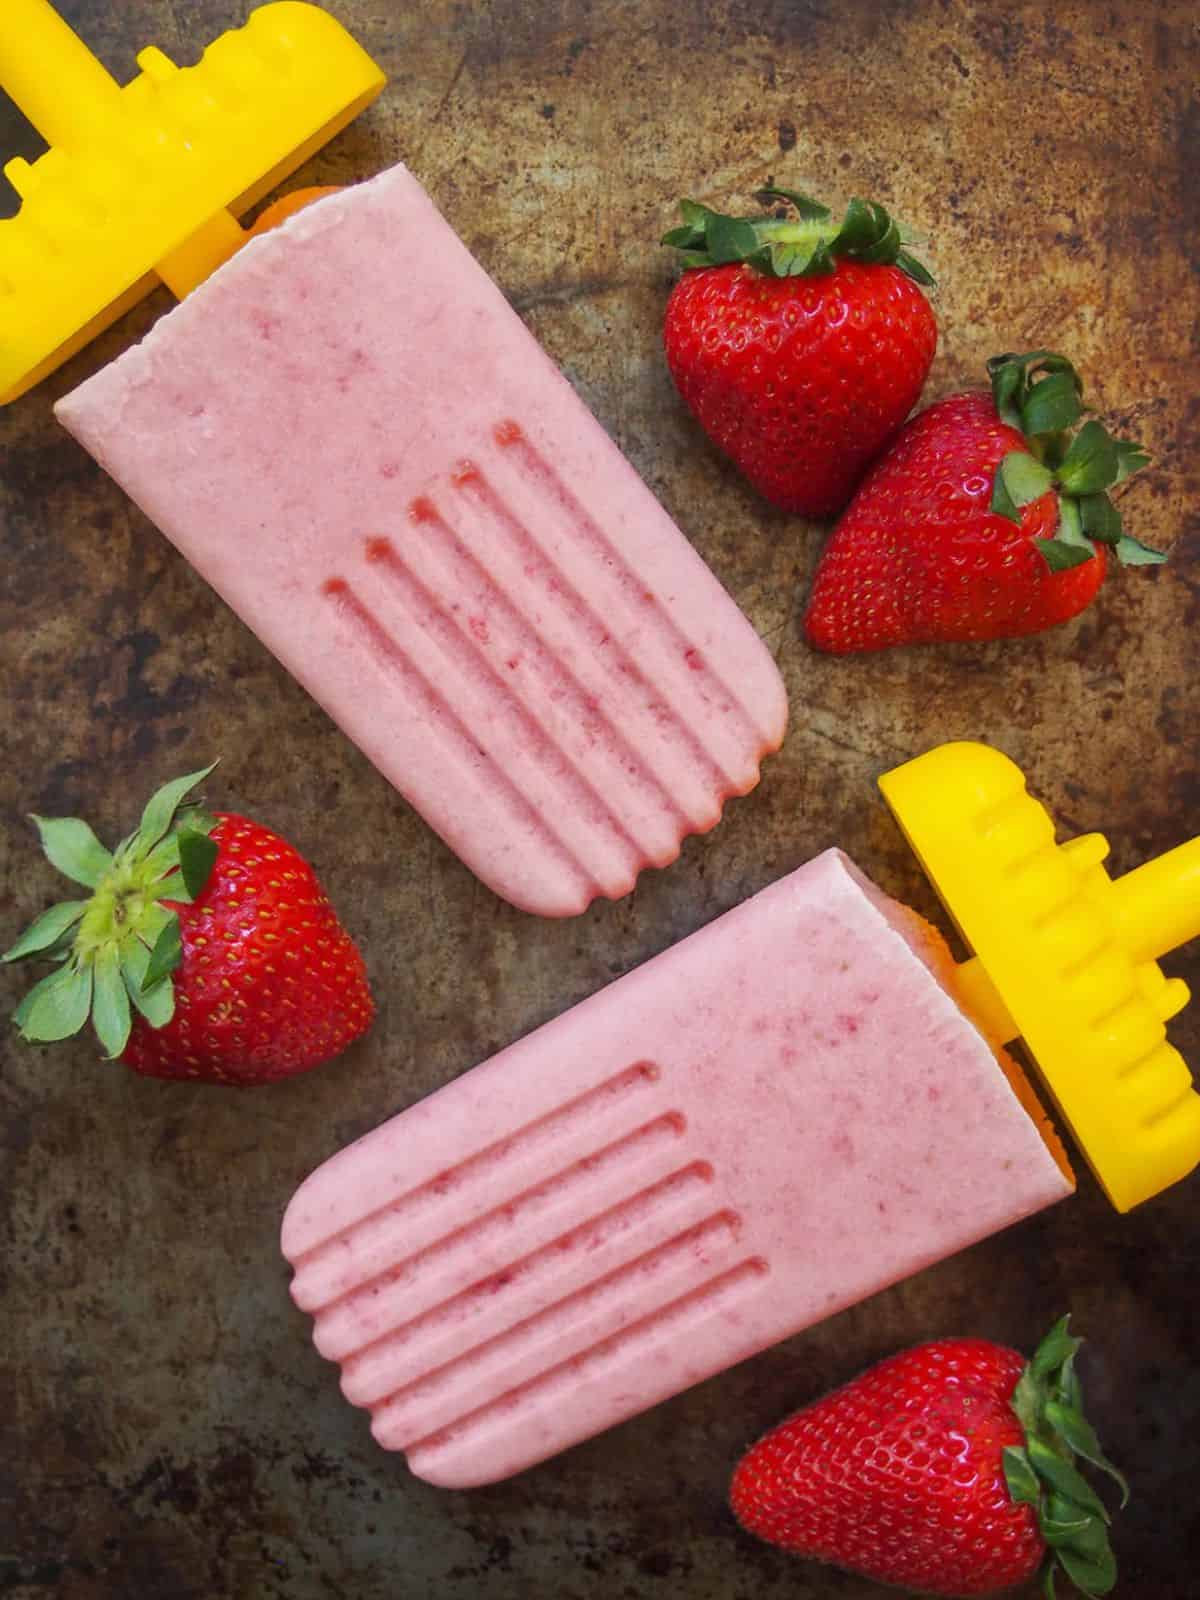 paletas de fresa con crema: a Mexican strawberry popsicles made with only three ingredients.